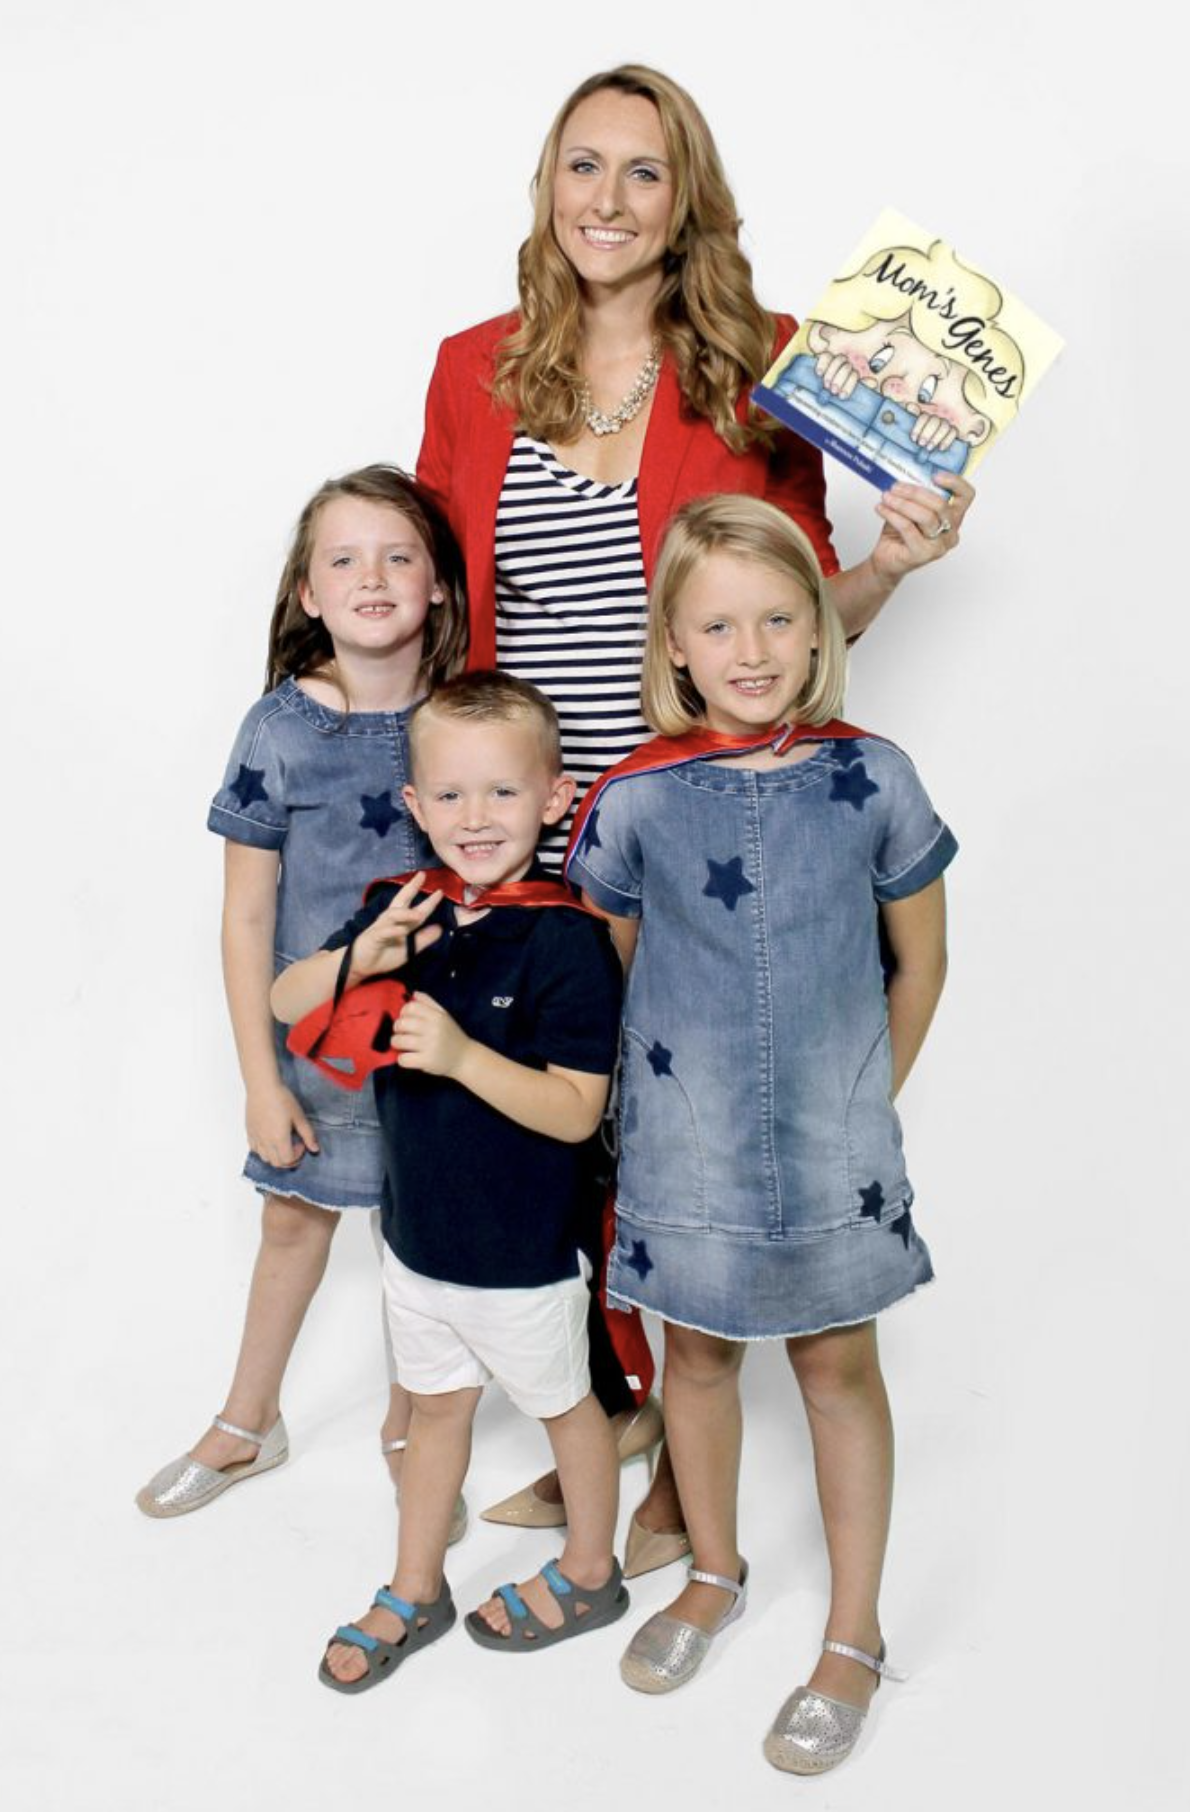 Photo of author Shannon Pulaski holding her book Mom's Genes standing with her three children